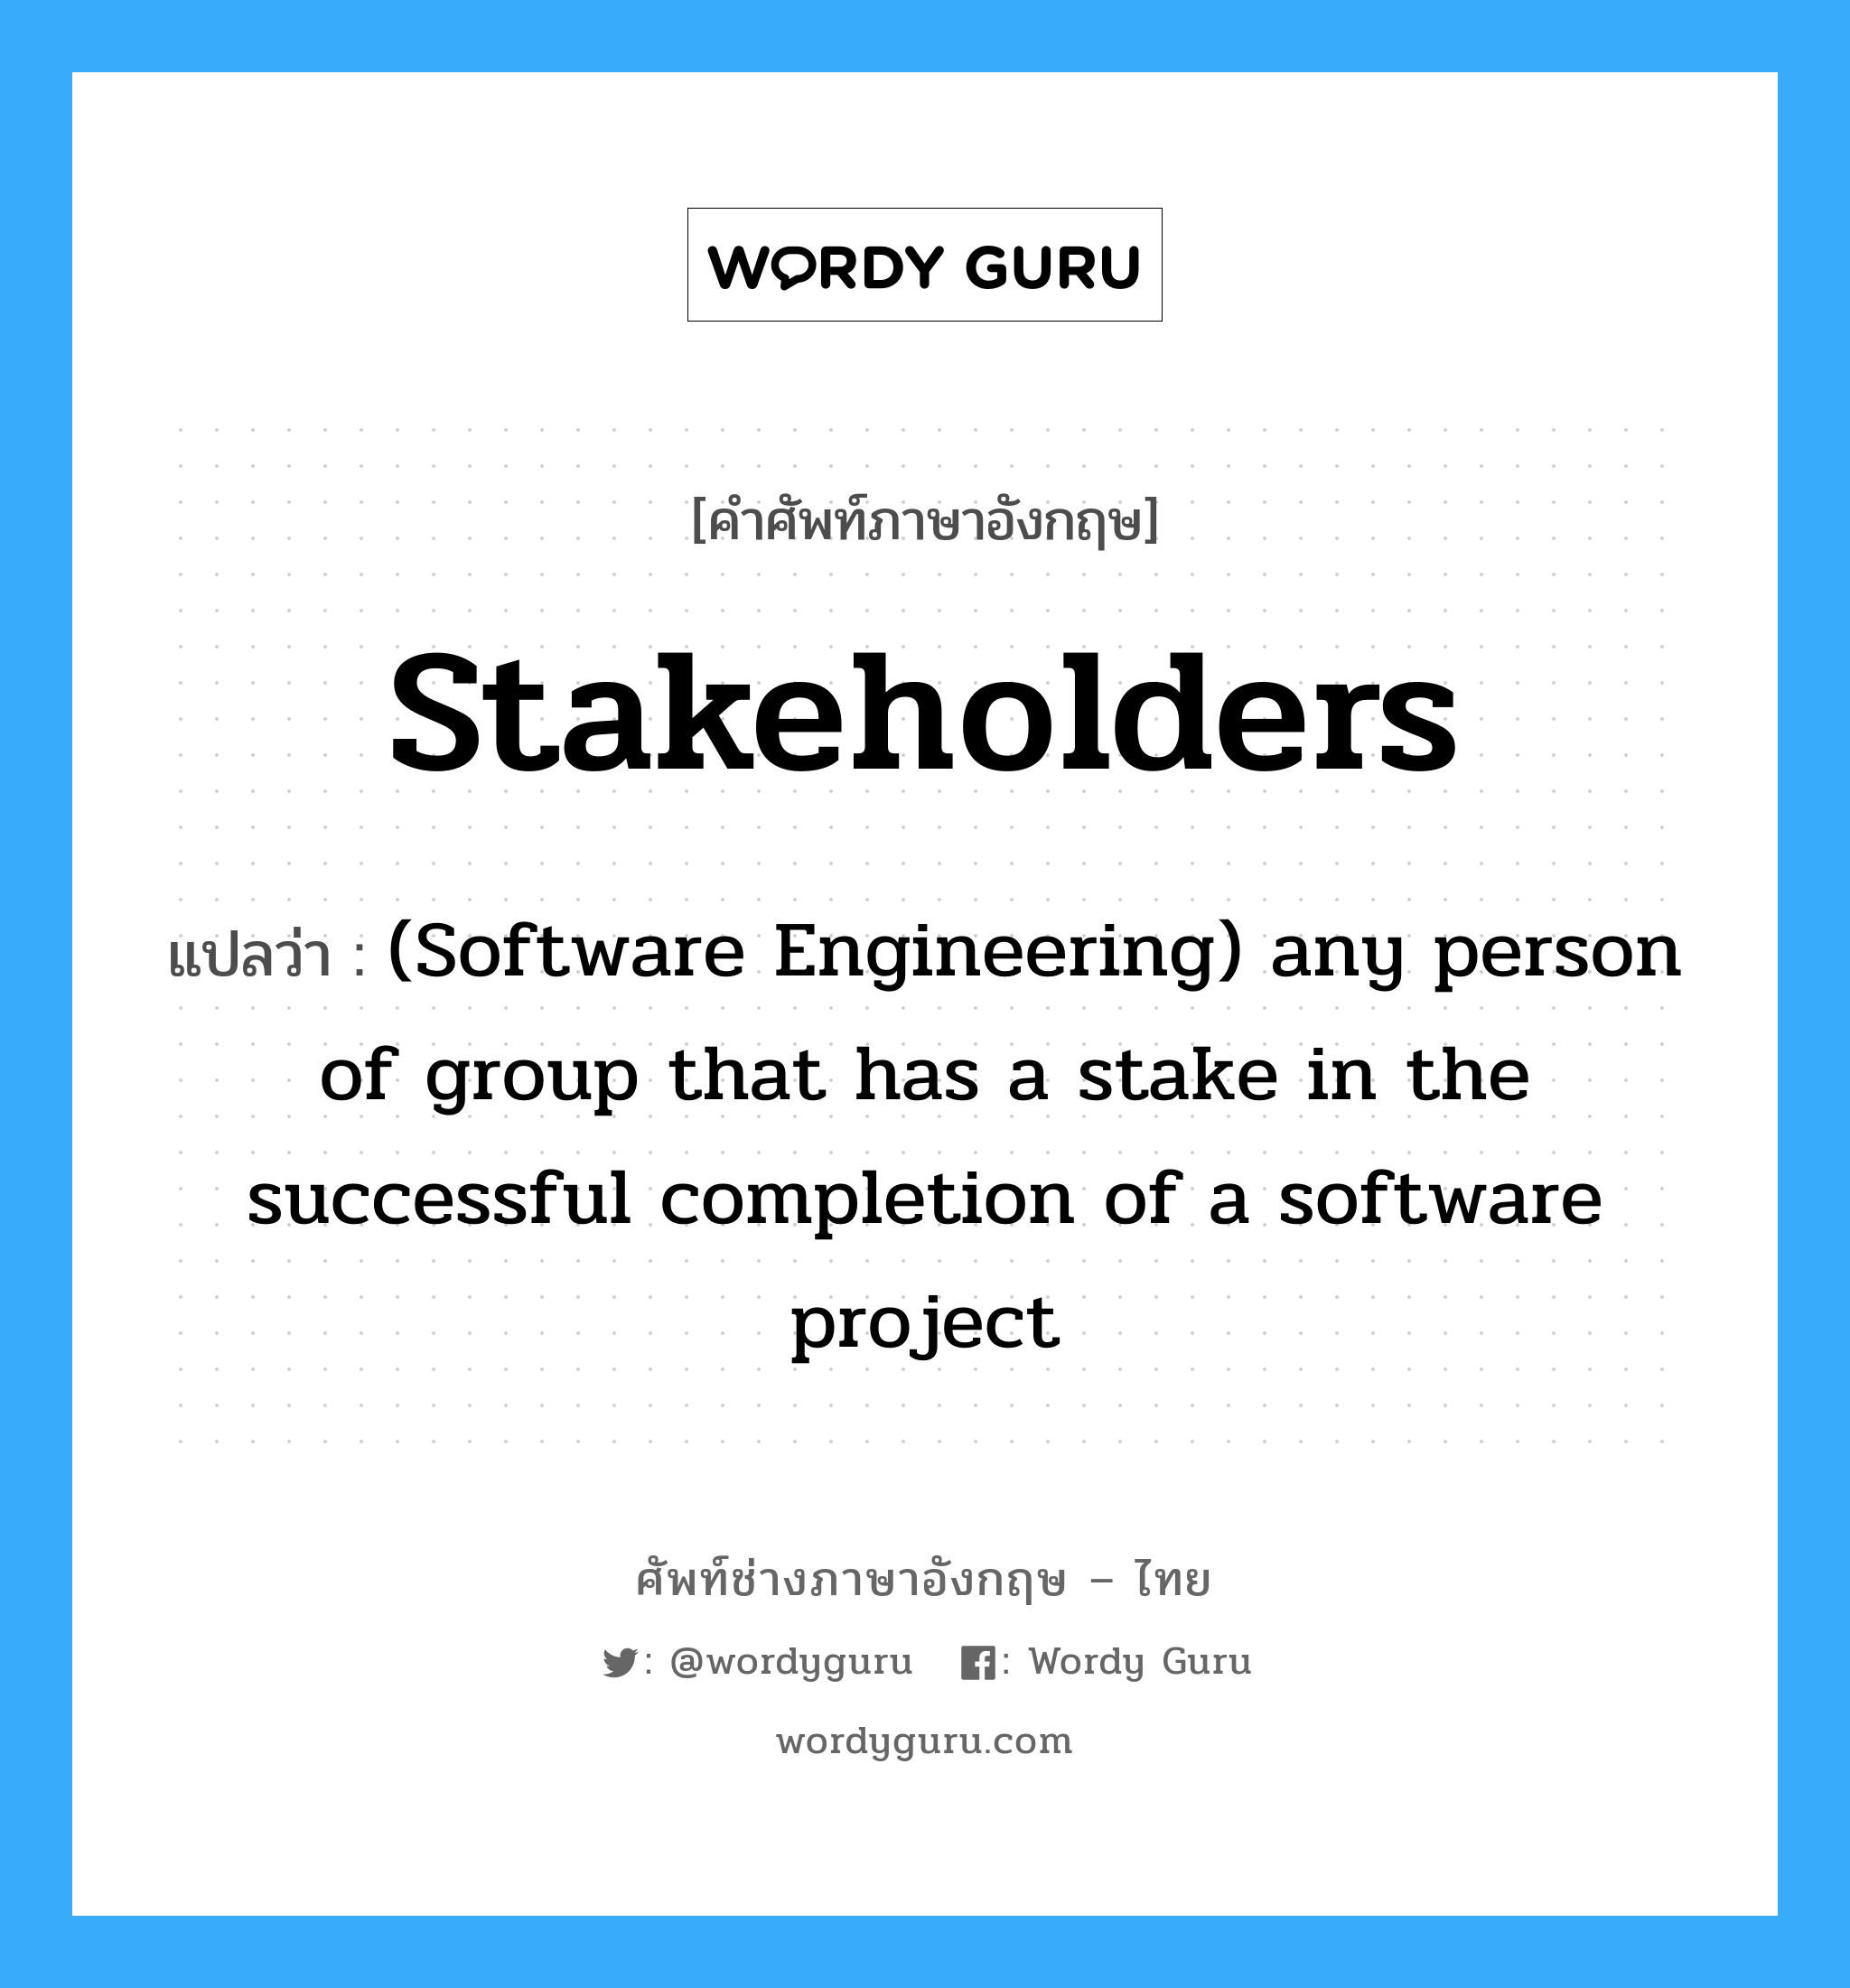 Stakeholders แปลว่า?, คำศัพท์ช่างภาษาอังกฤษ - ไทย Stakeholders คำศัพท์ภาษาอังกฤษ Stakeholders แปลว่า (Software Engineering) any person of group that has a stake in the successful completion of a software project